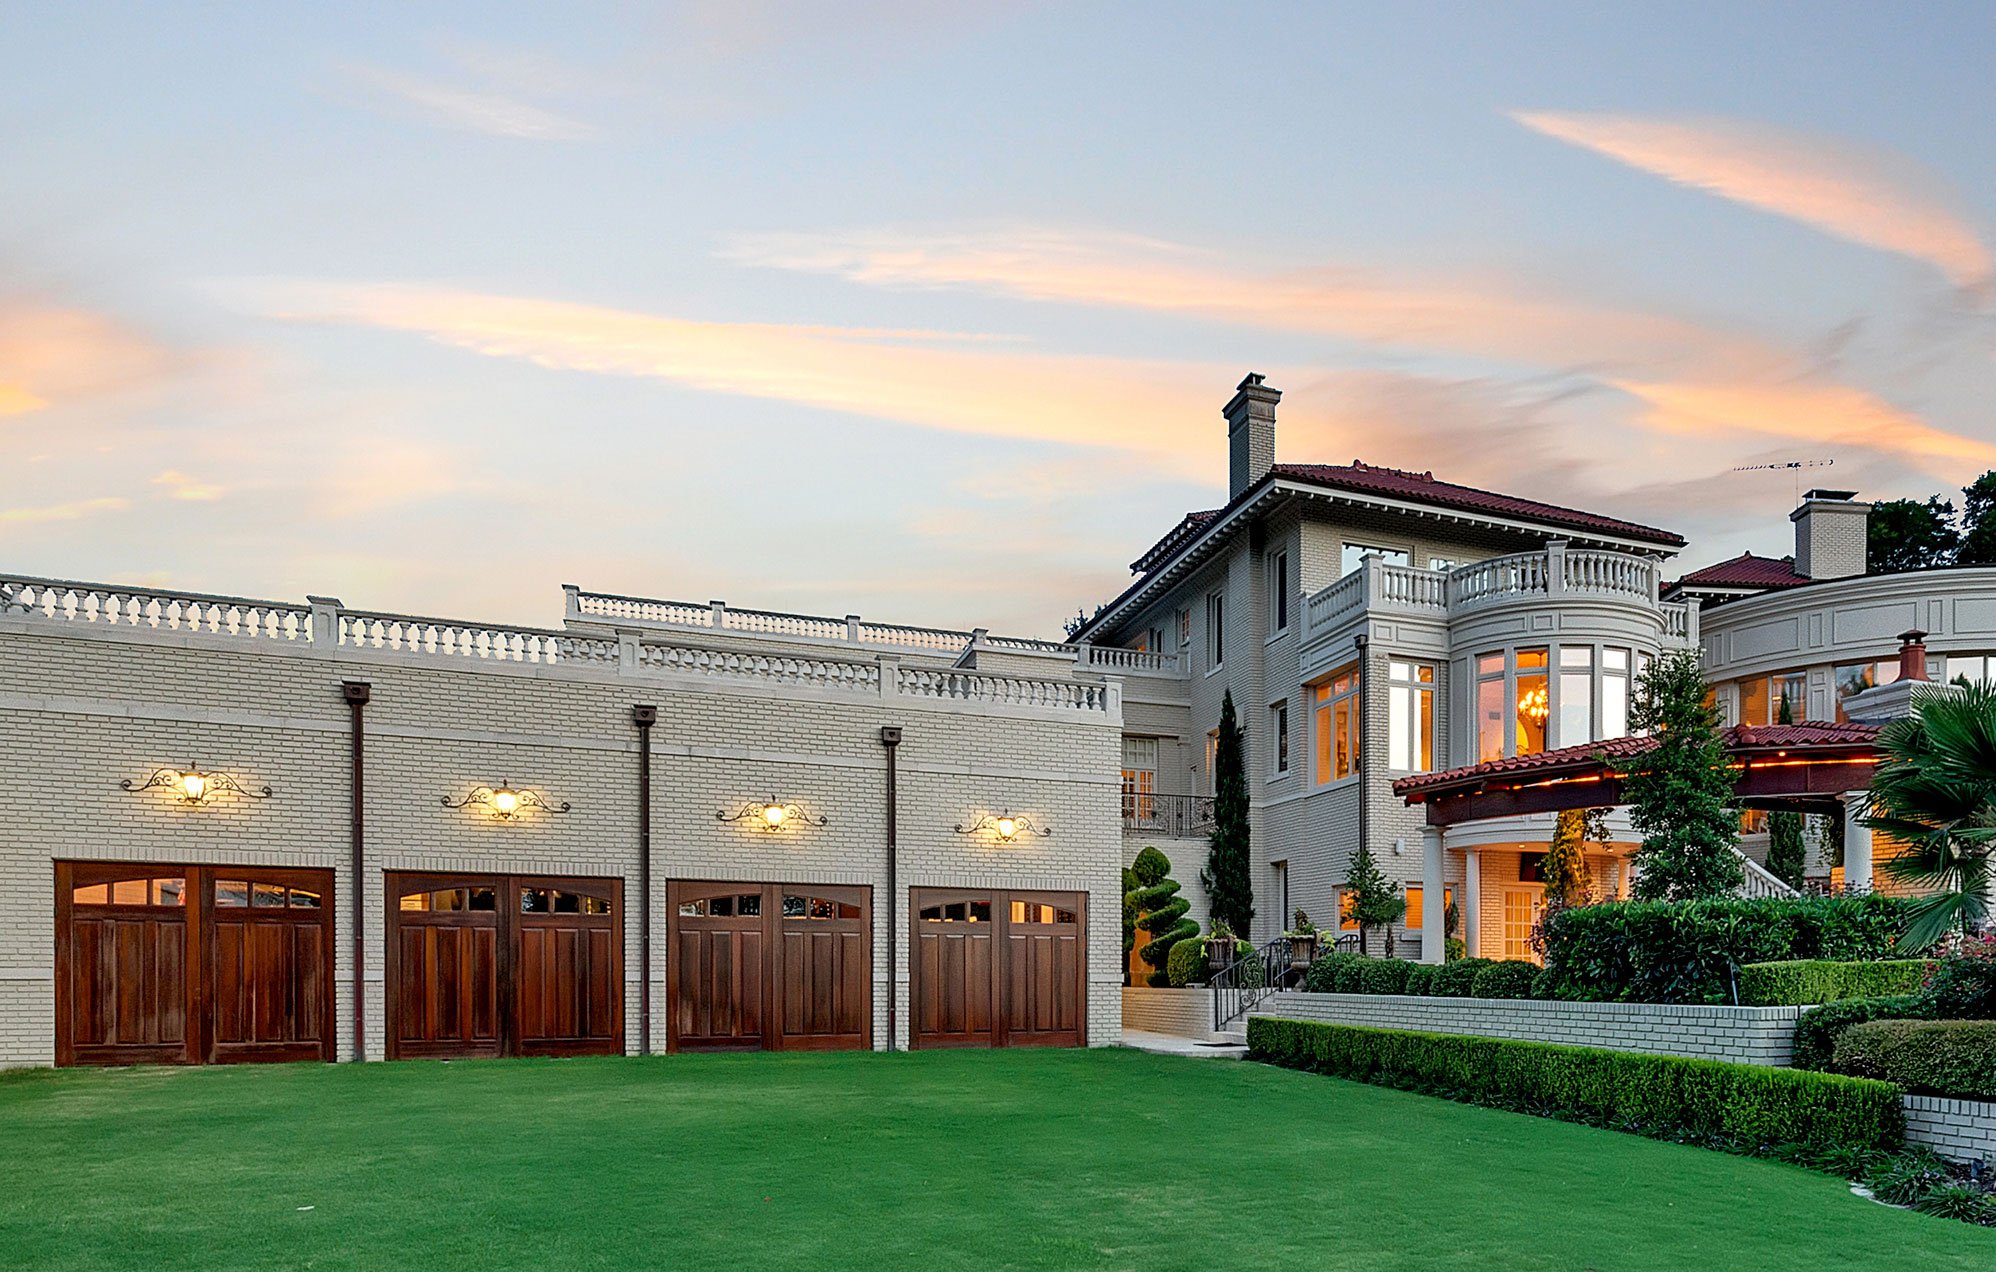 The Baldridge House, a magnificent 1.5-acre estate in Fort Worth, has a multi-vehicle garage facility with a car lift, workshop, and wash bay.